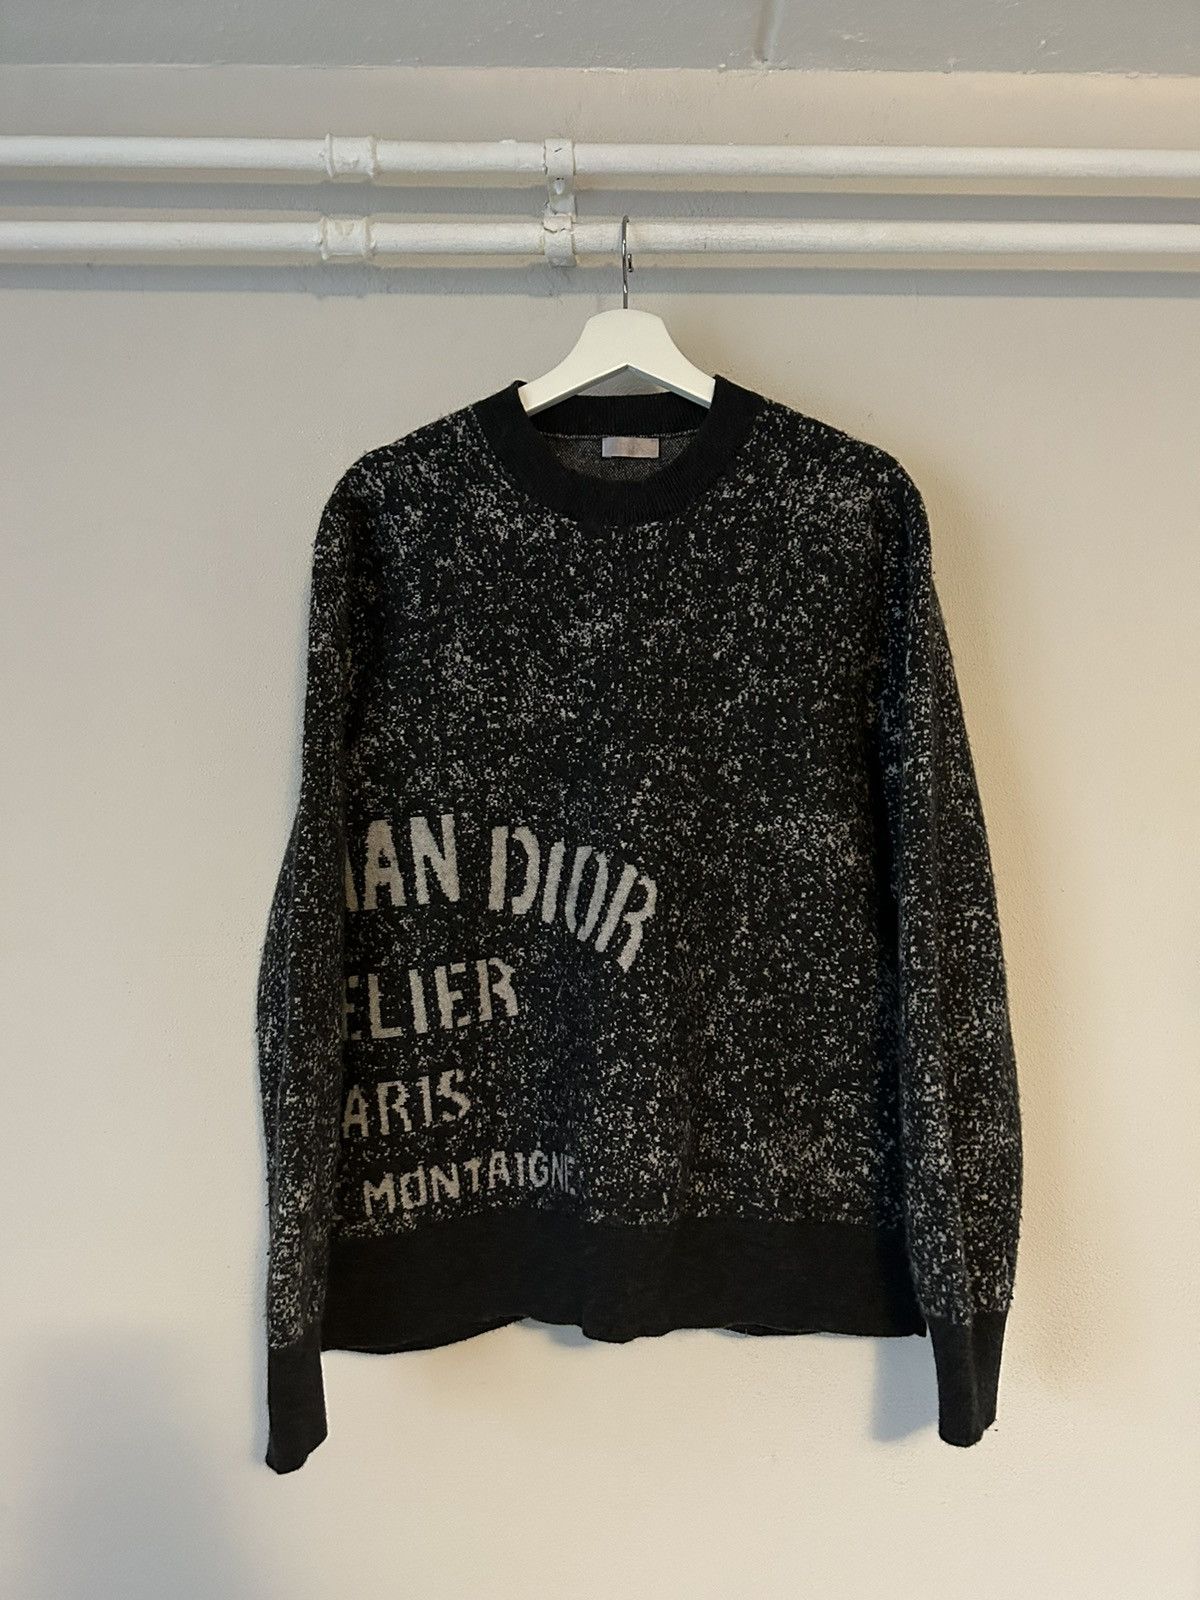 Dior 'Christian Dior Atelier' Knit Sweater | Grailed